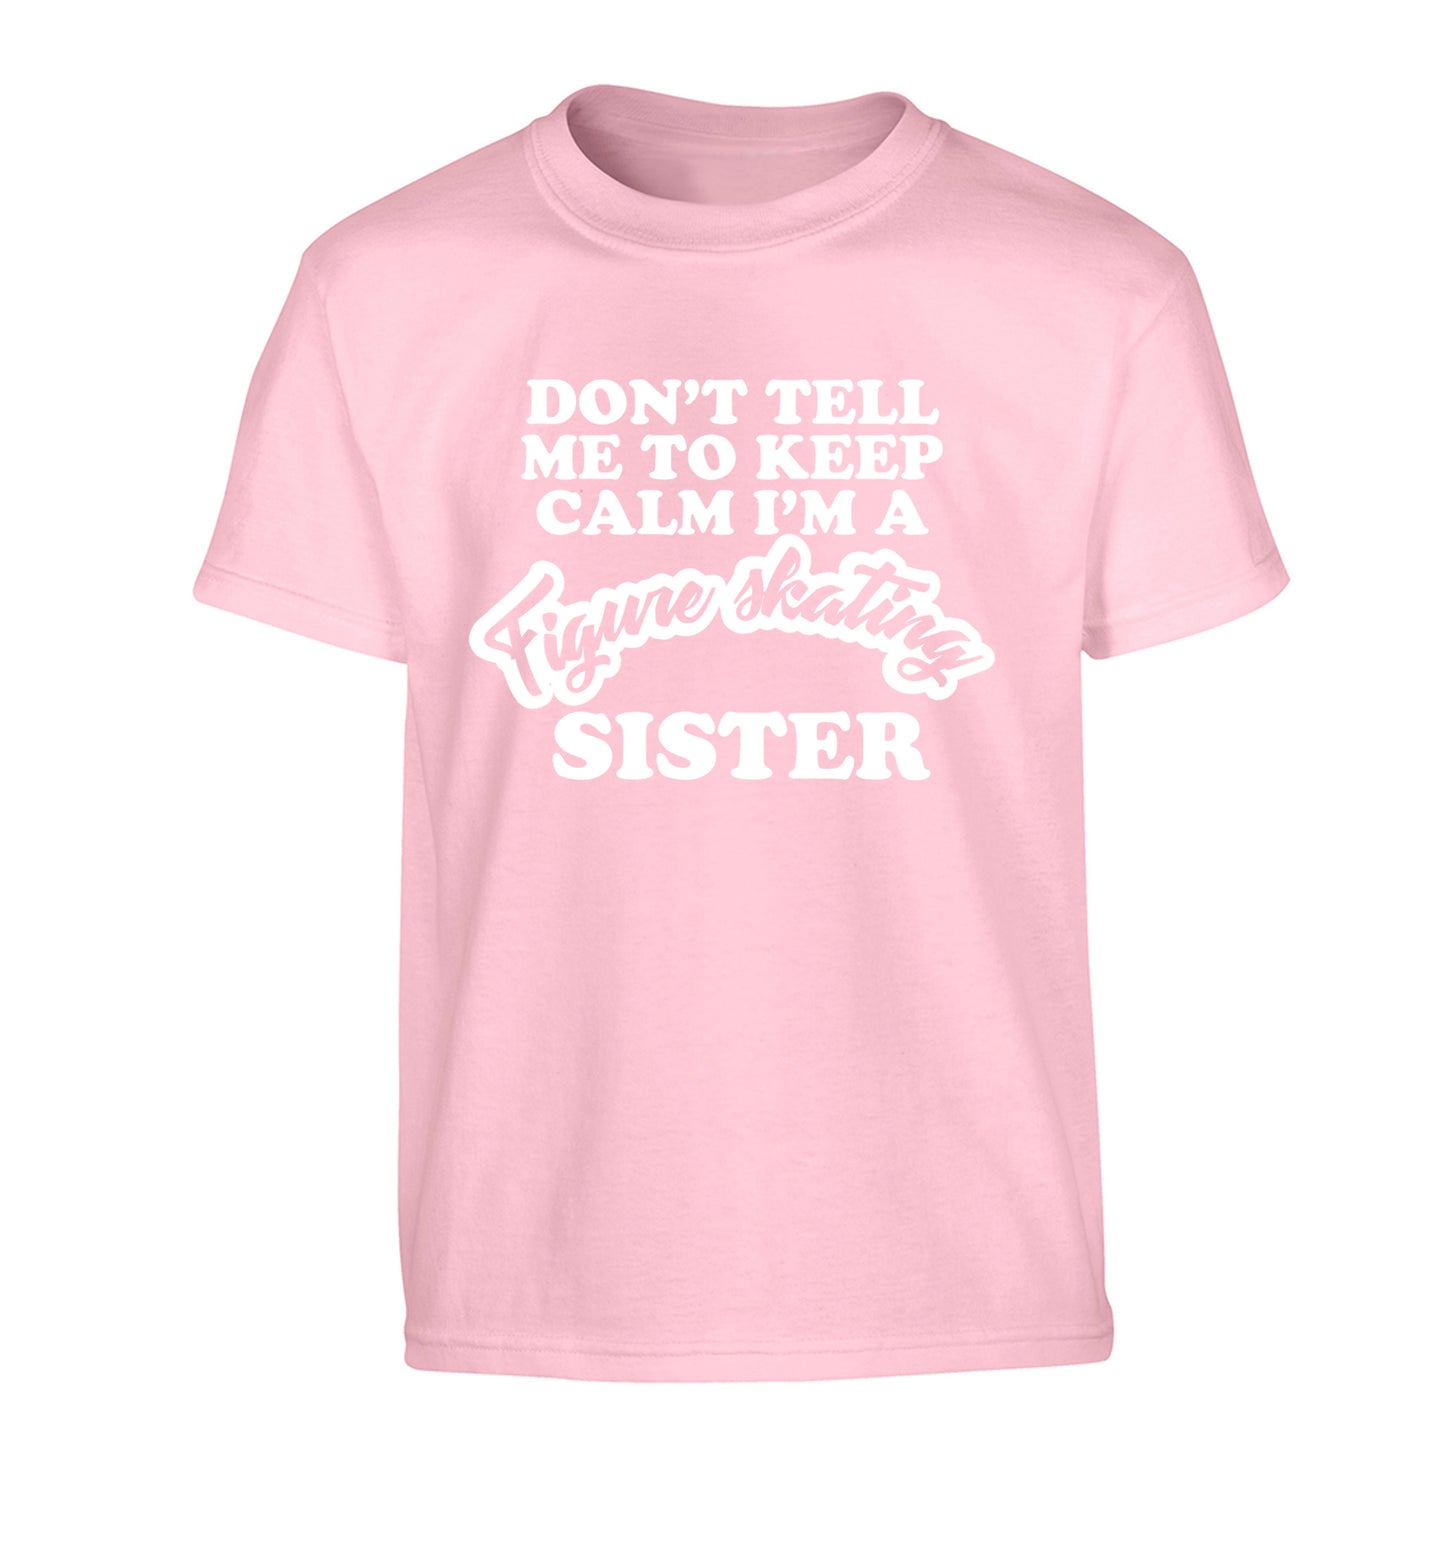 Don't tell me to keep calm I'm a figure skating sister Children's light pink Tshirt 12-14 Years